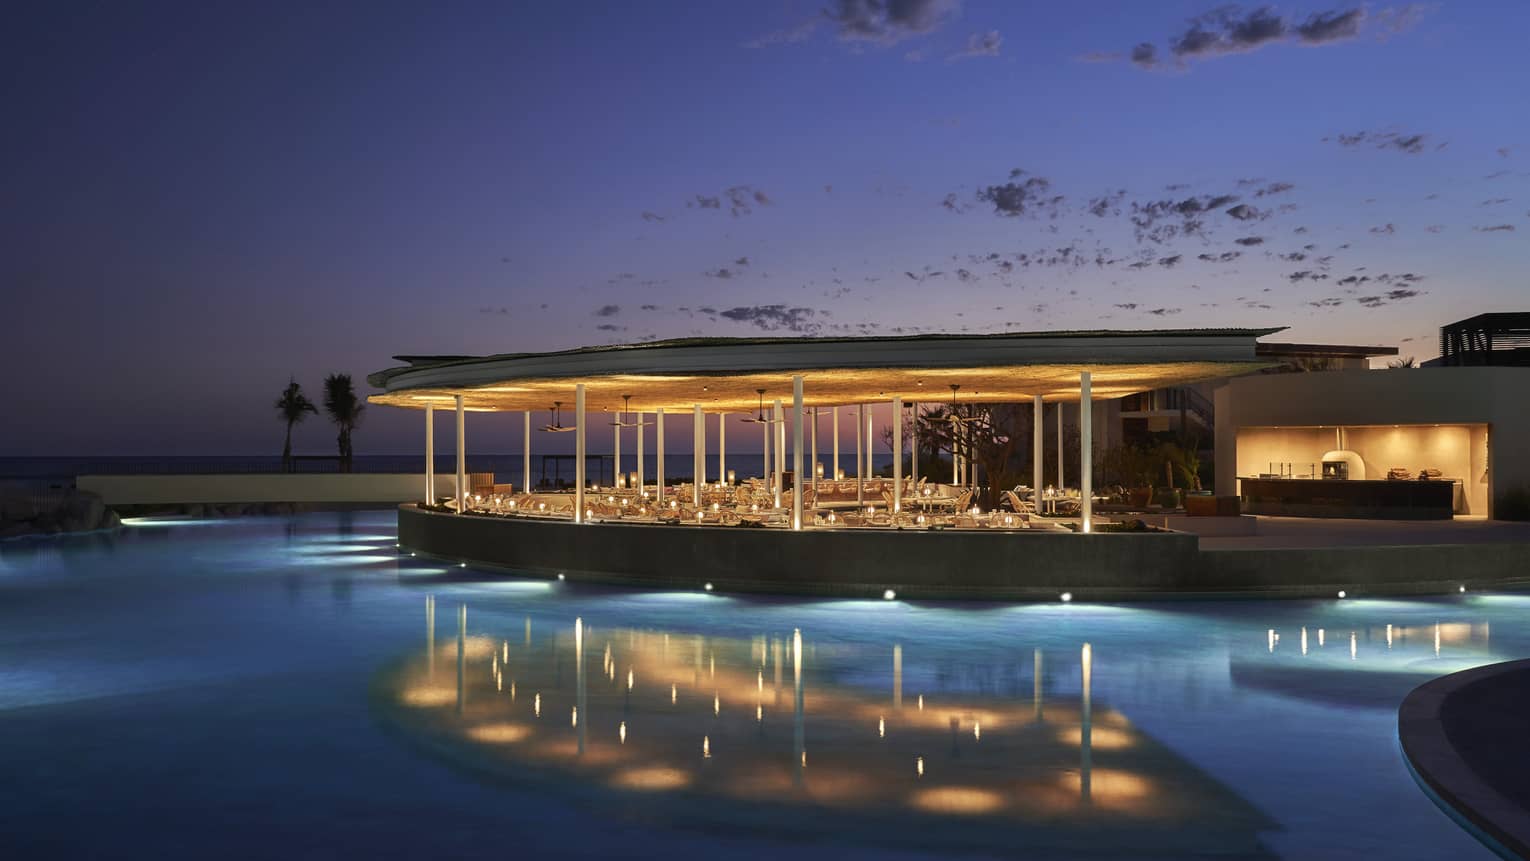 The exterior of an outdoor eating area at night on the water of a shore, it is well lit with lights.